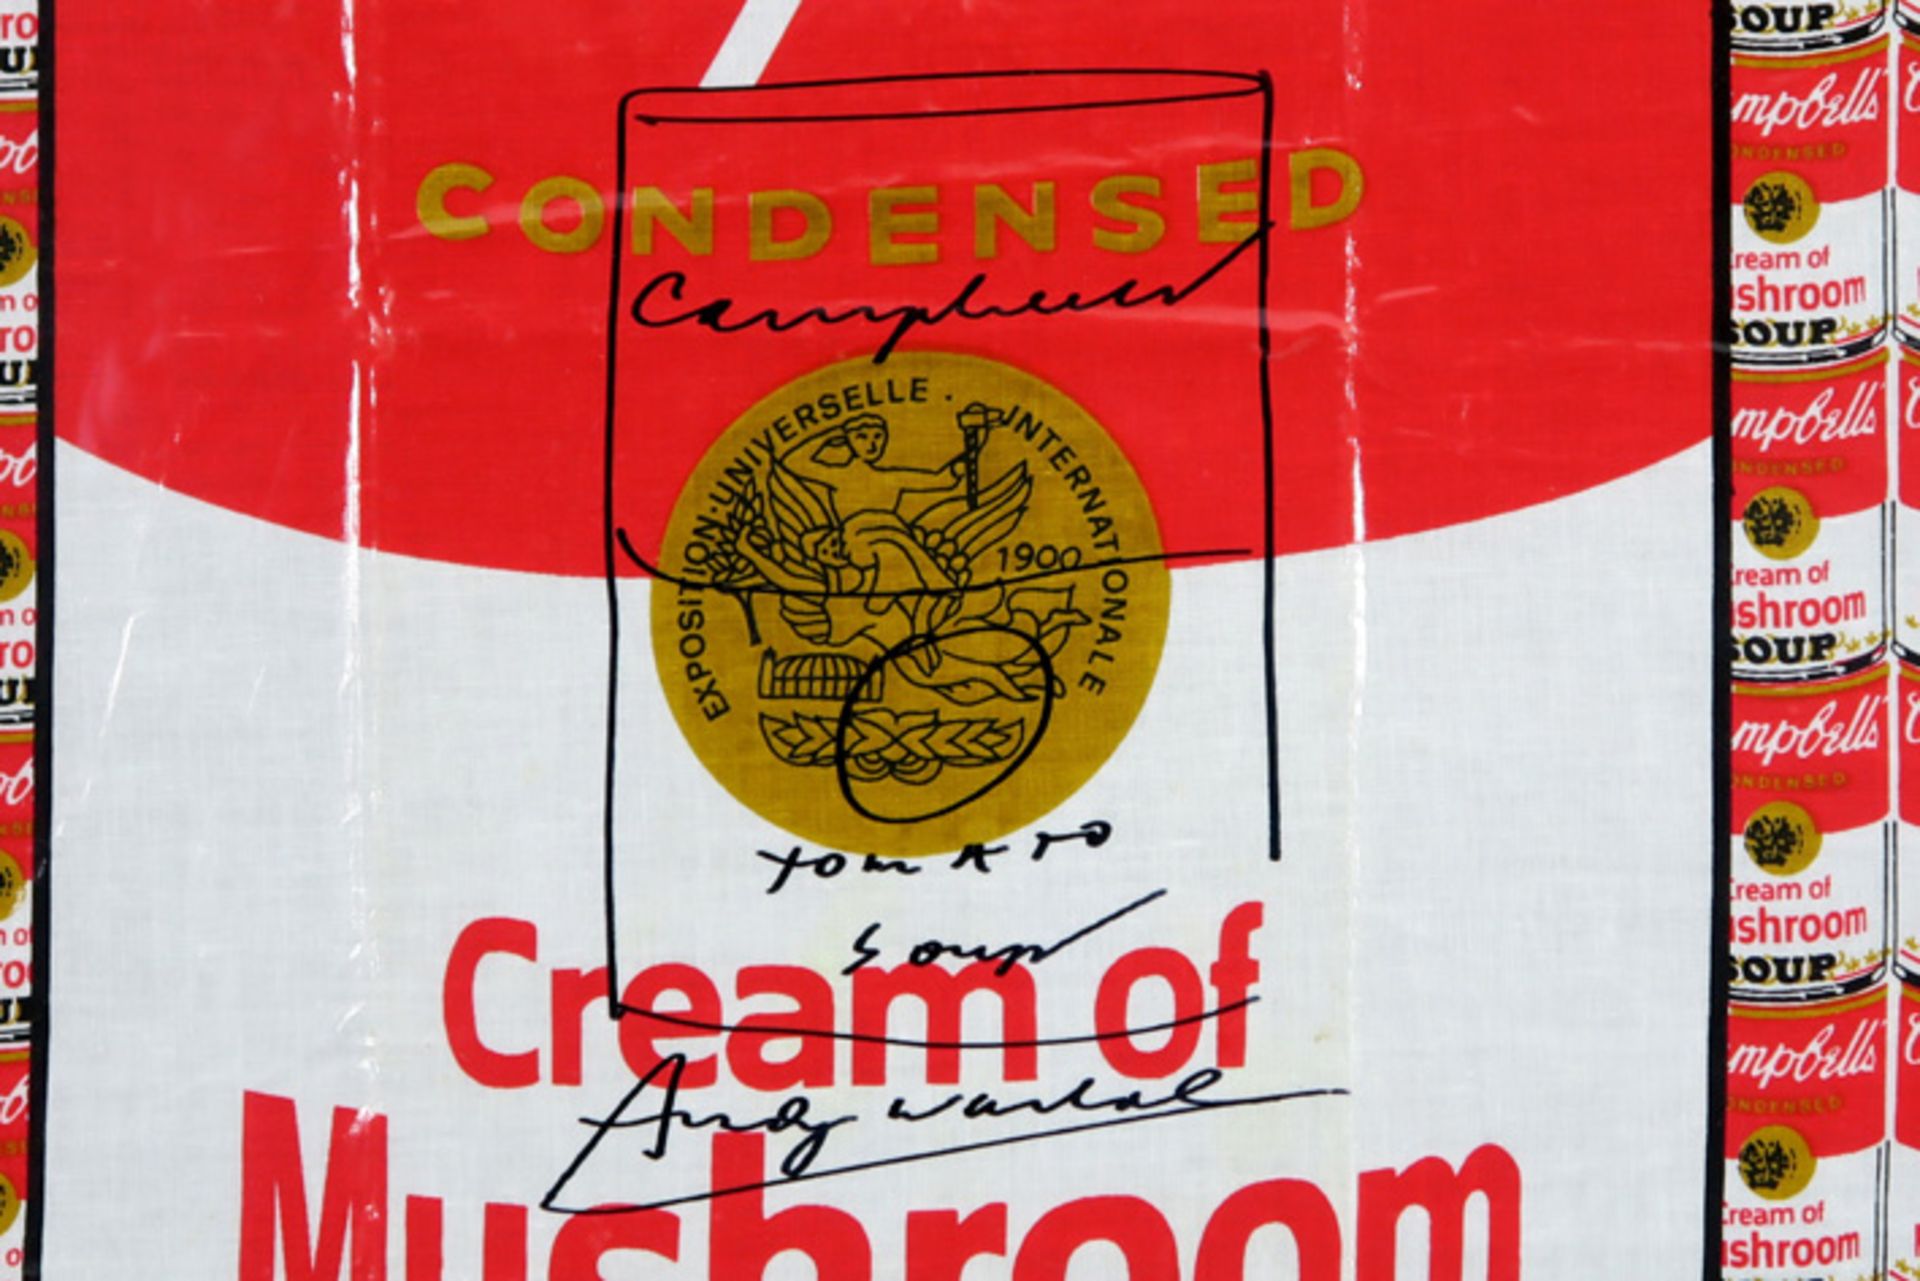 Andy Warhol signed drawing on a "Campbell's Tomato Soup" apron - framed||WARHOL ANDY (1930 - 1987) t - Bild 3 aus 3